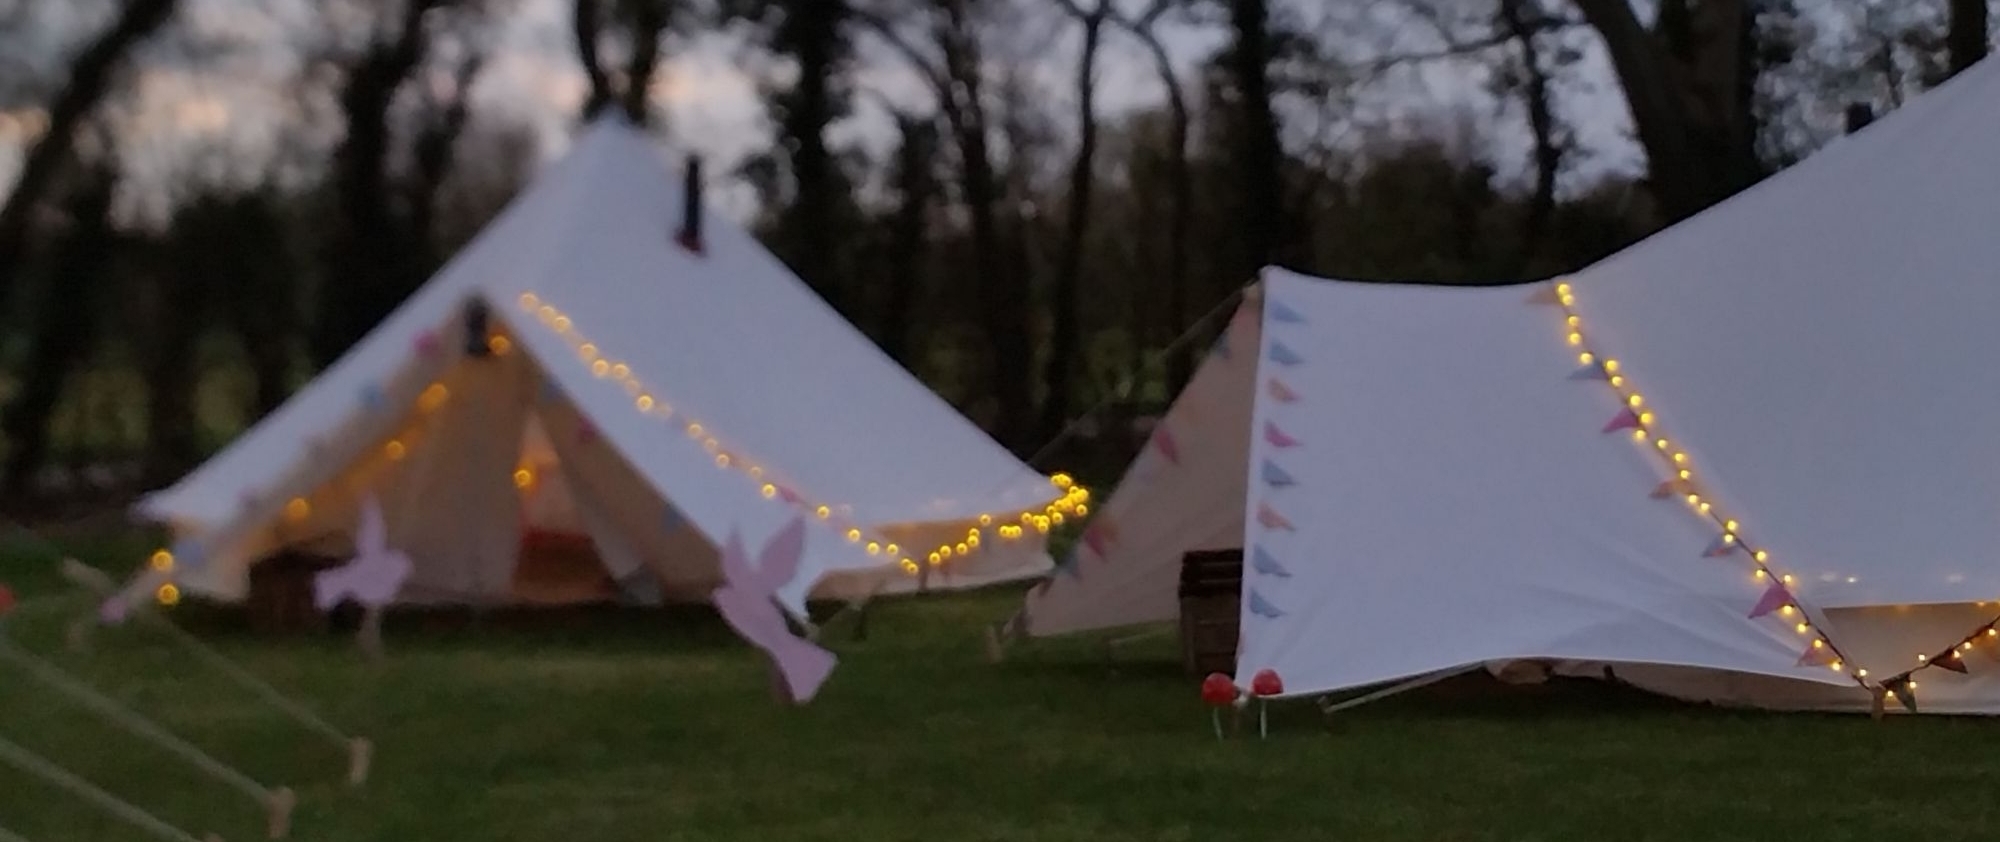 fairy lights at dusk on bell tents